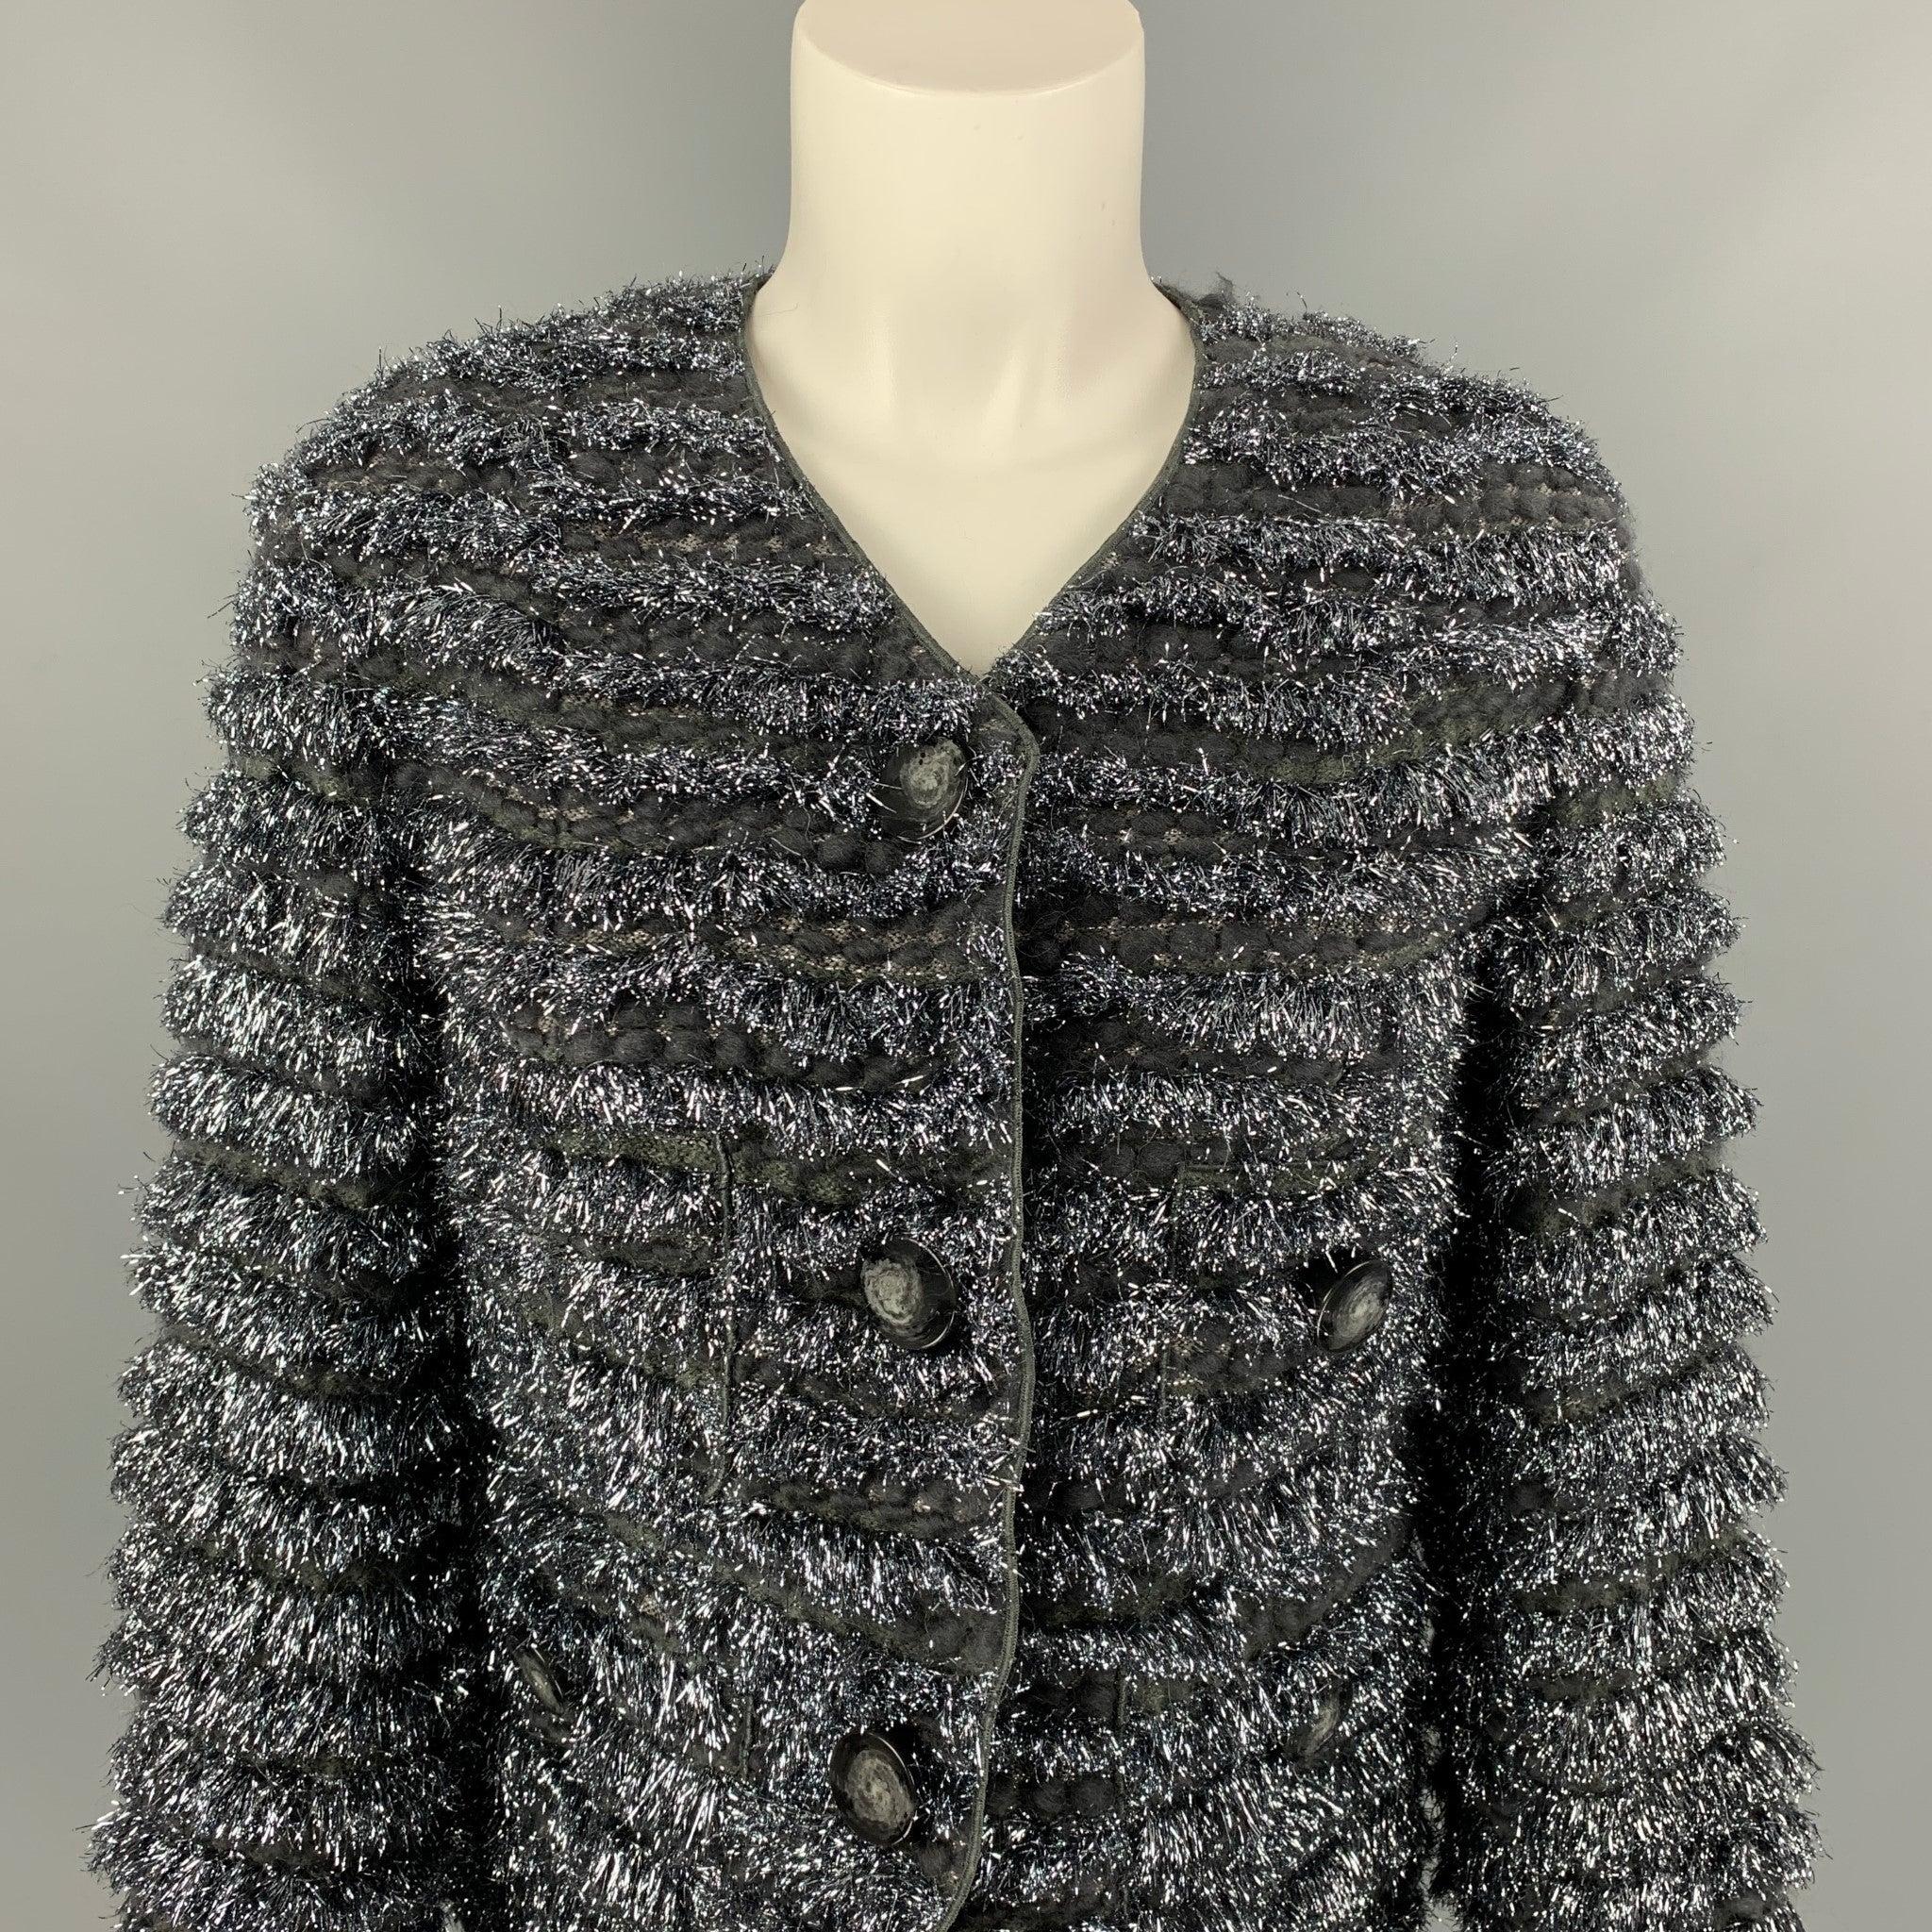 MARC JACOBS jacket comes in a silver & grey metallic wool blend with a full liner featuring a collarless style, cropped, fringe trim, button details, and a snap button closure. Made in USA.
New With Tags.
 

Marked:   0 

Measurements: 
 
Shoulder: